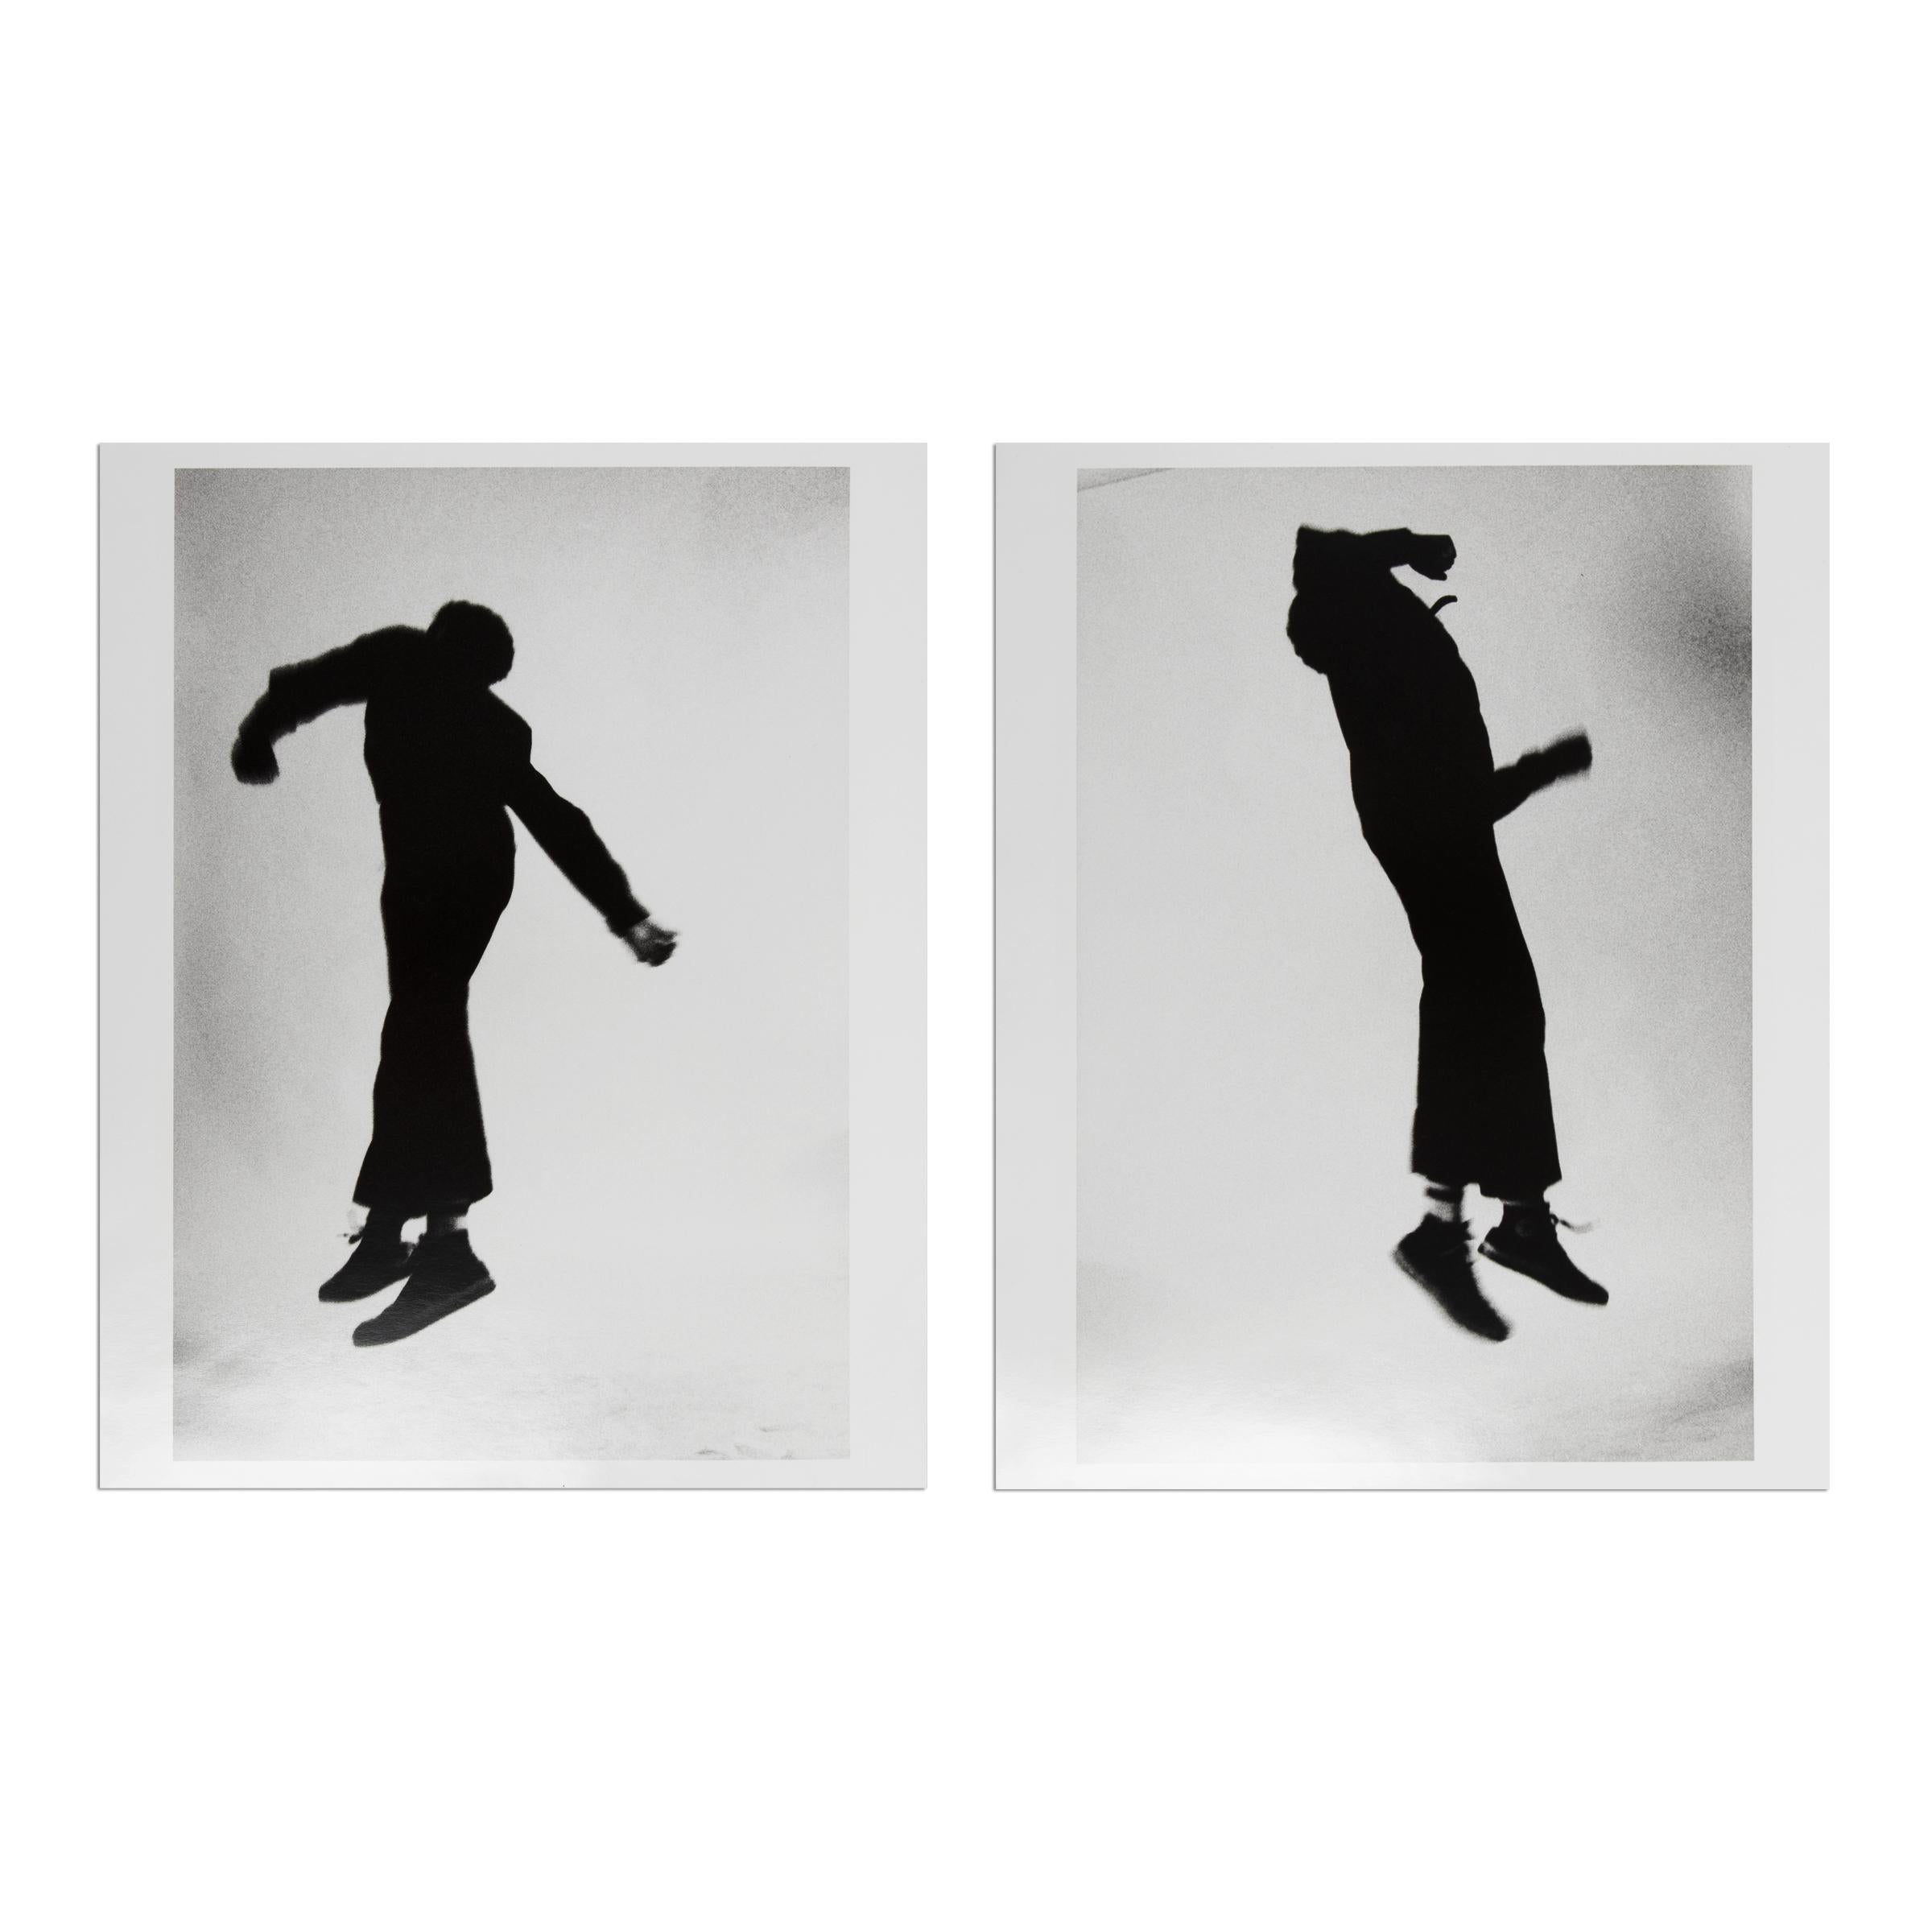 Robert Longo, Untitled (Men in the Cities) - Set of 2 Photographs, Signed 